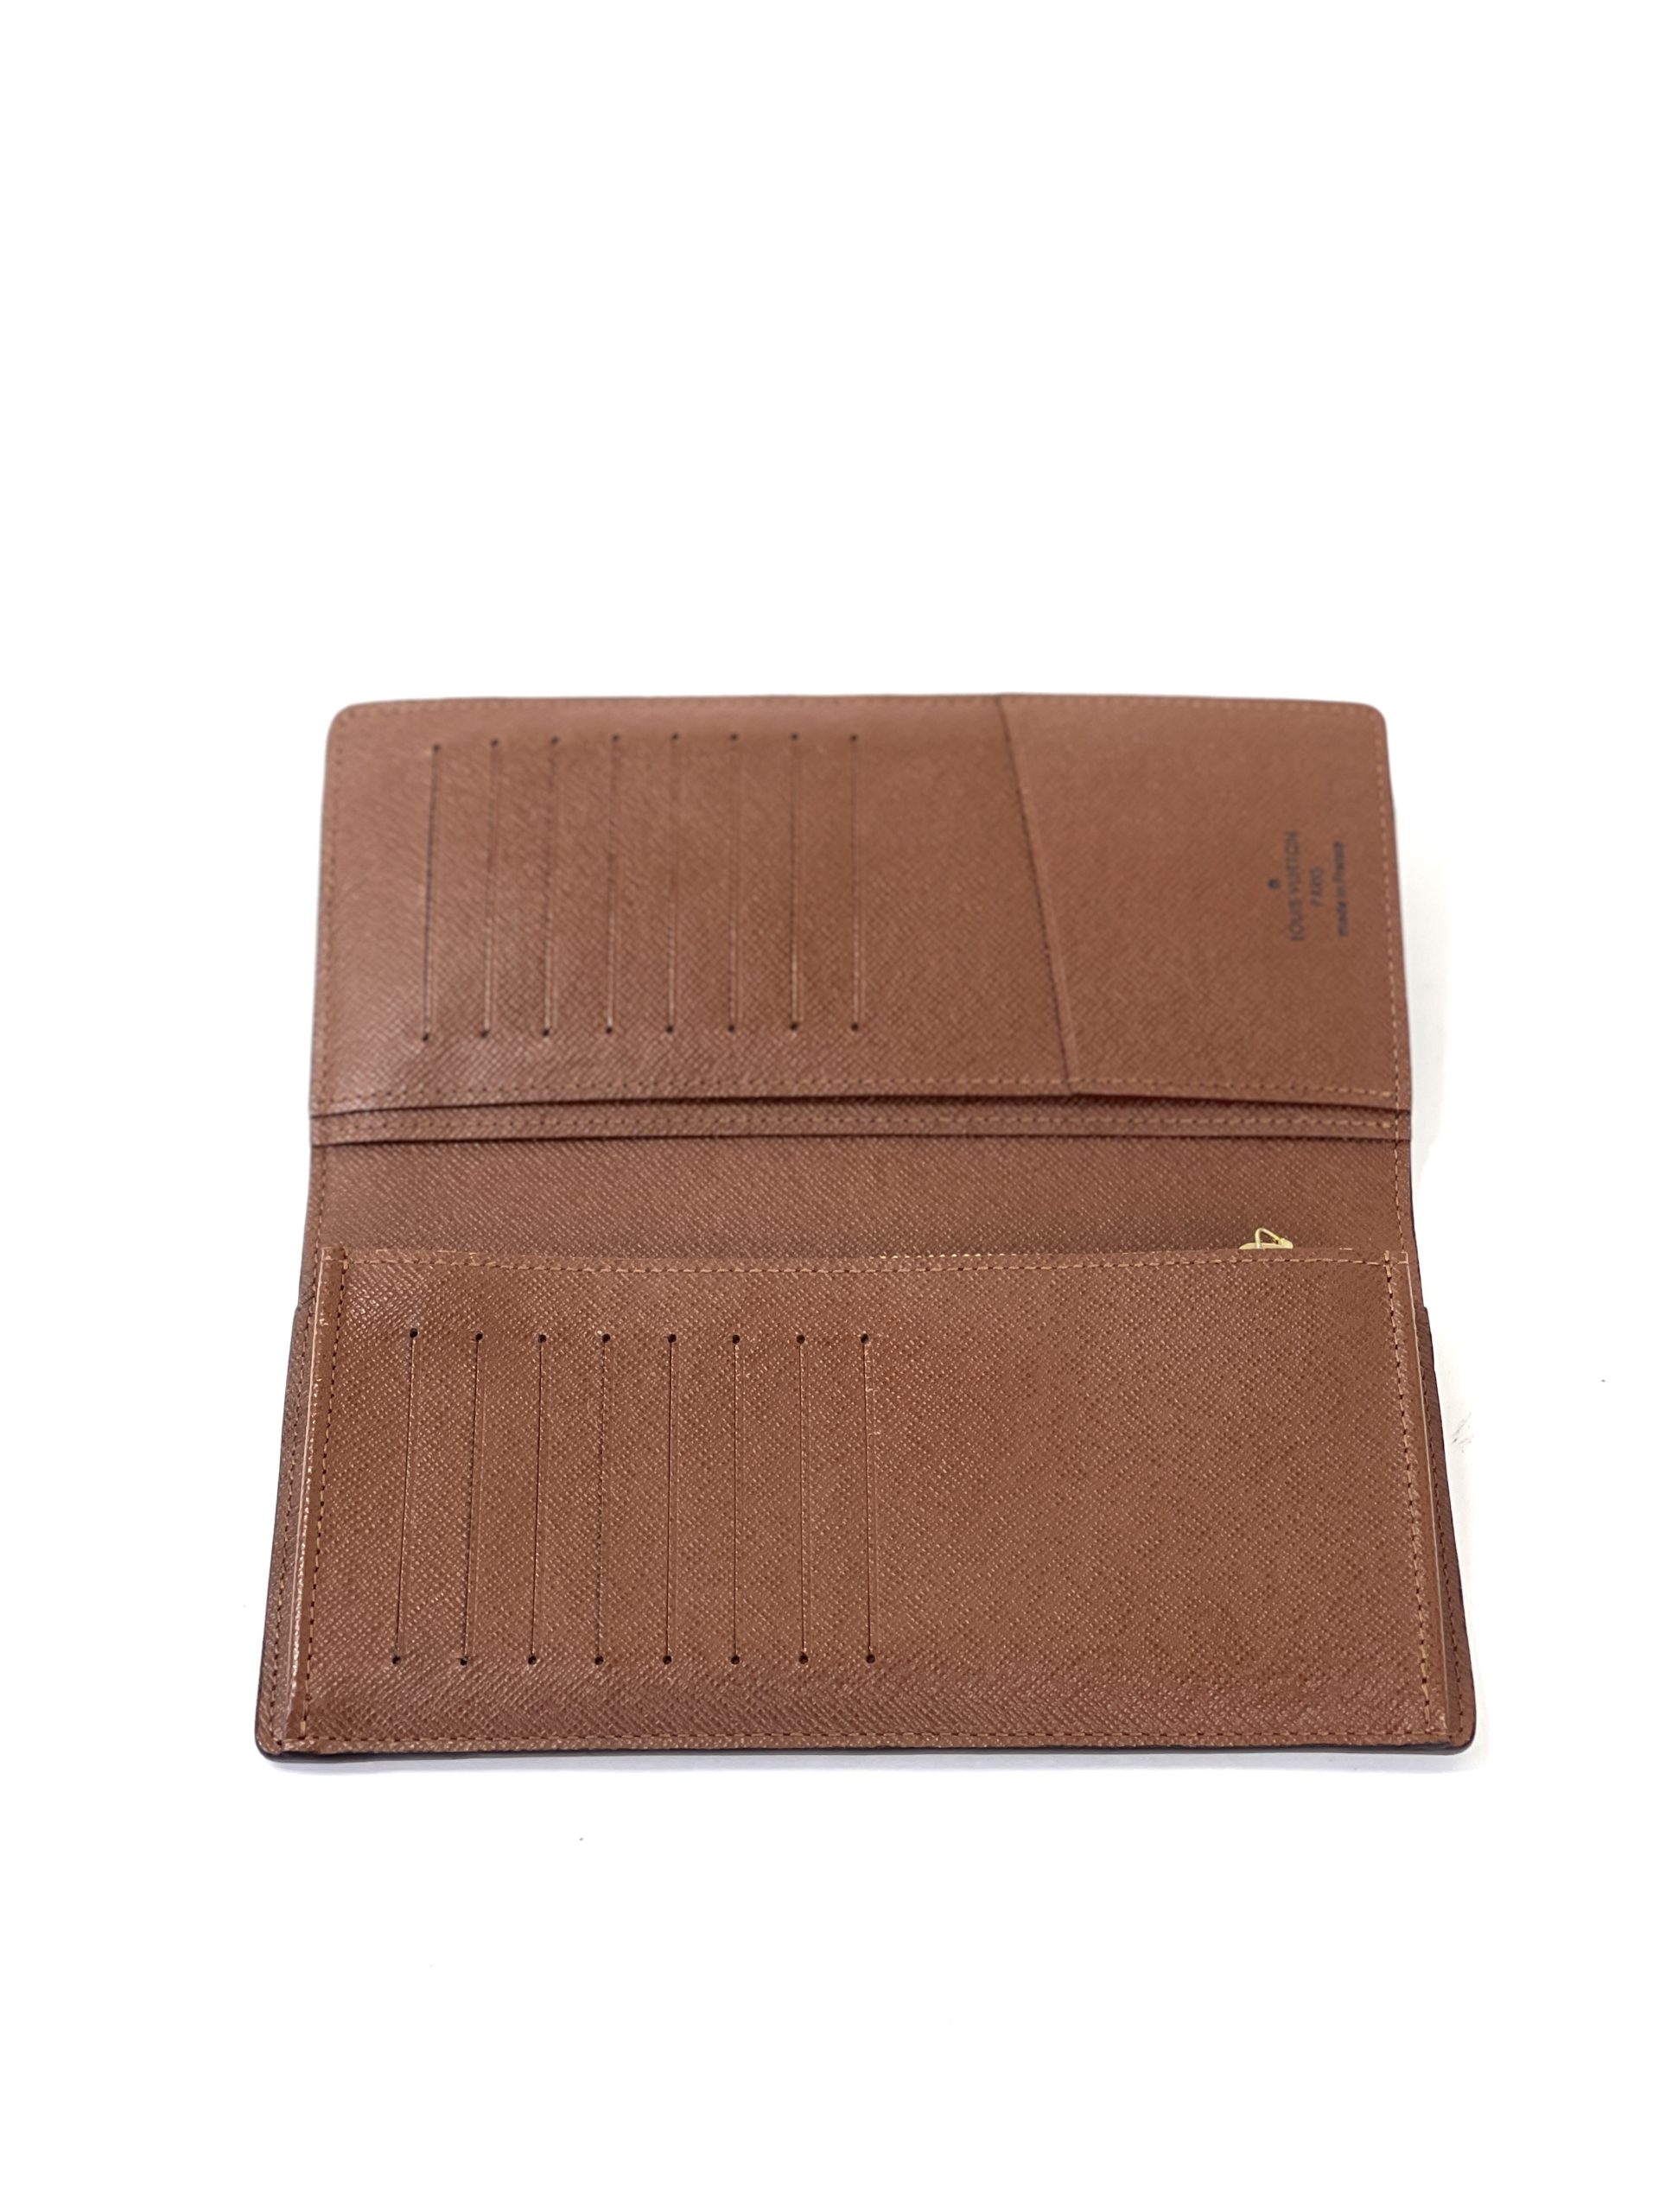 Brazza Wallet Monogram - Wallets and Small Leather Goods